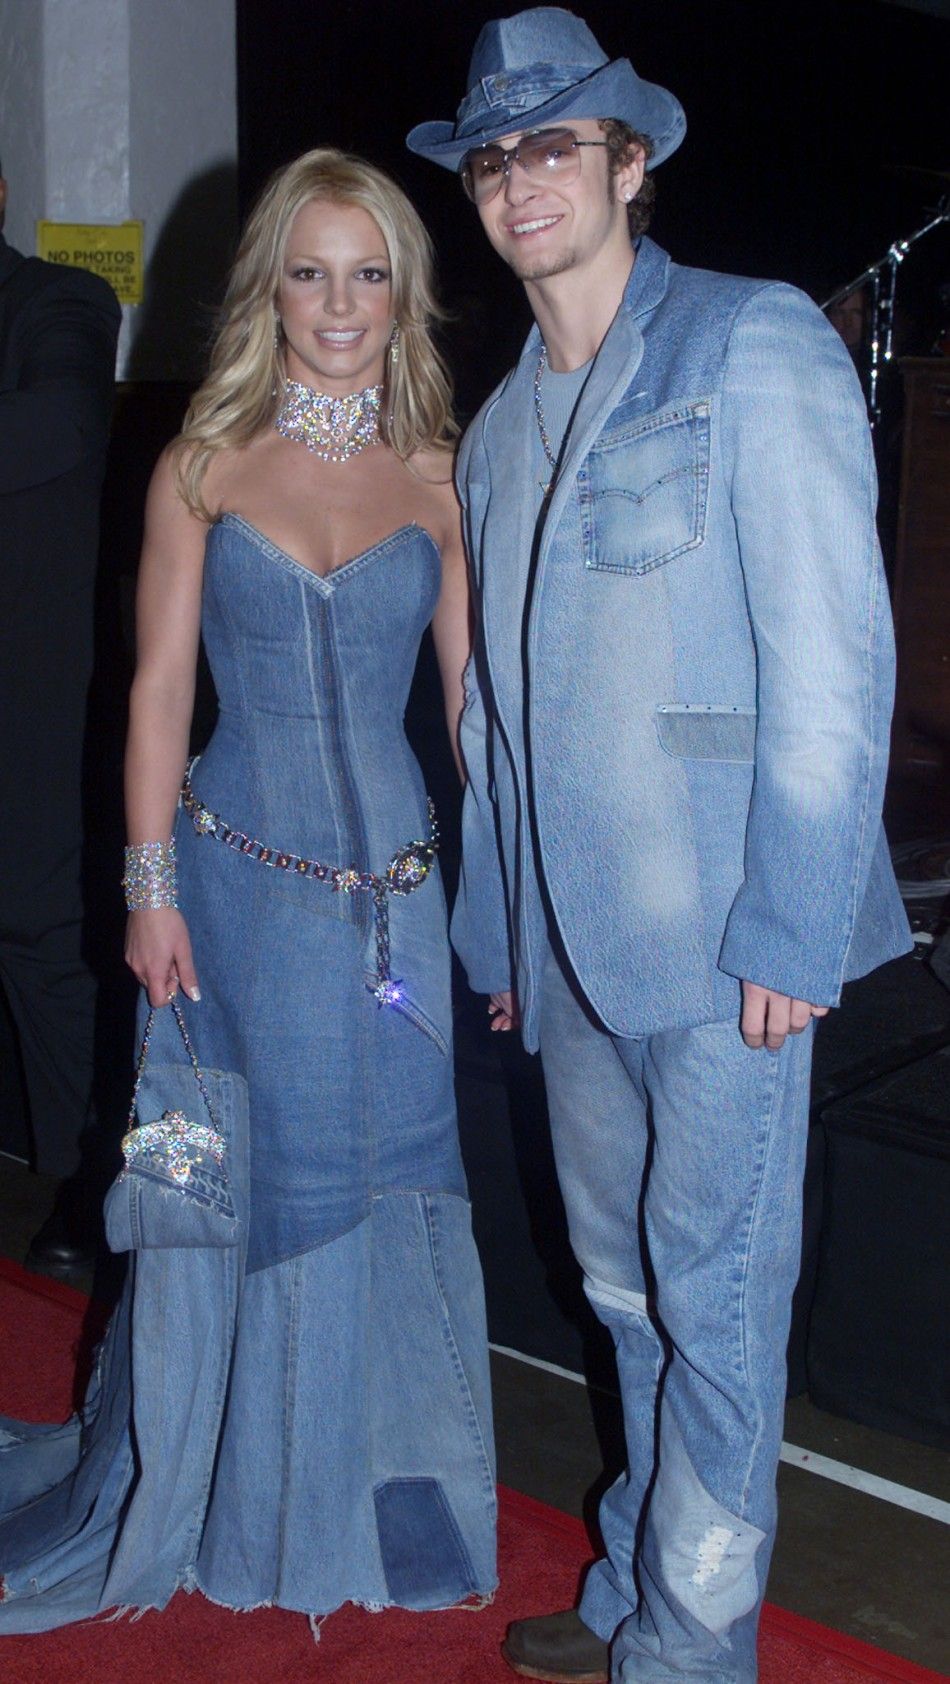 In 2001, with Britney